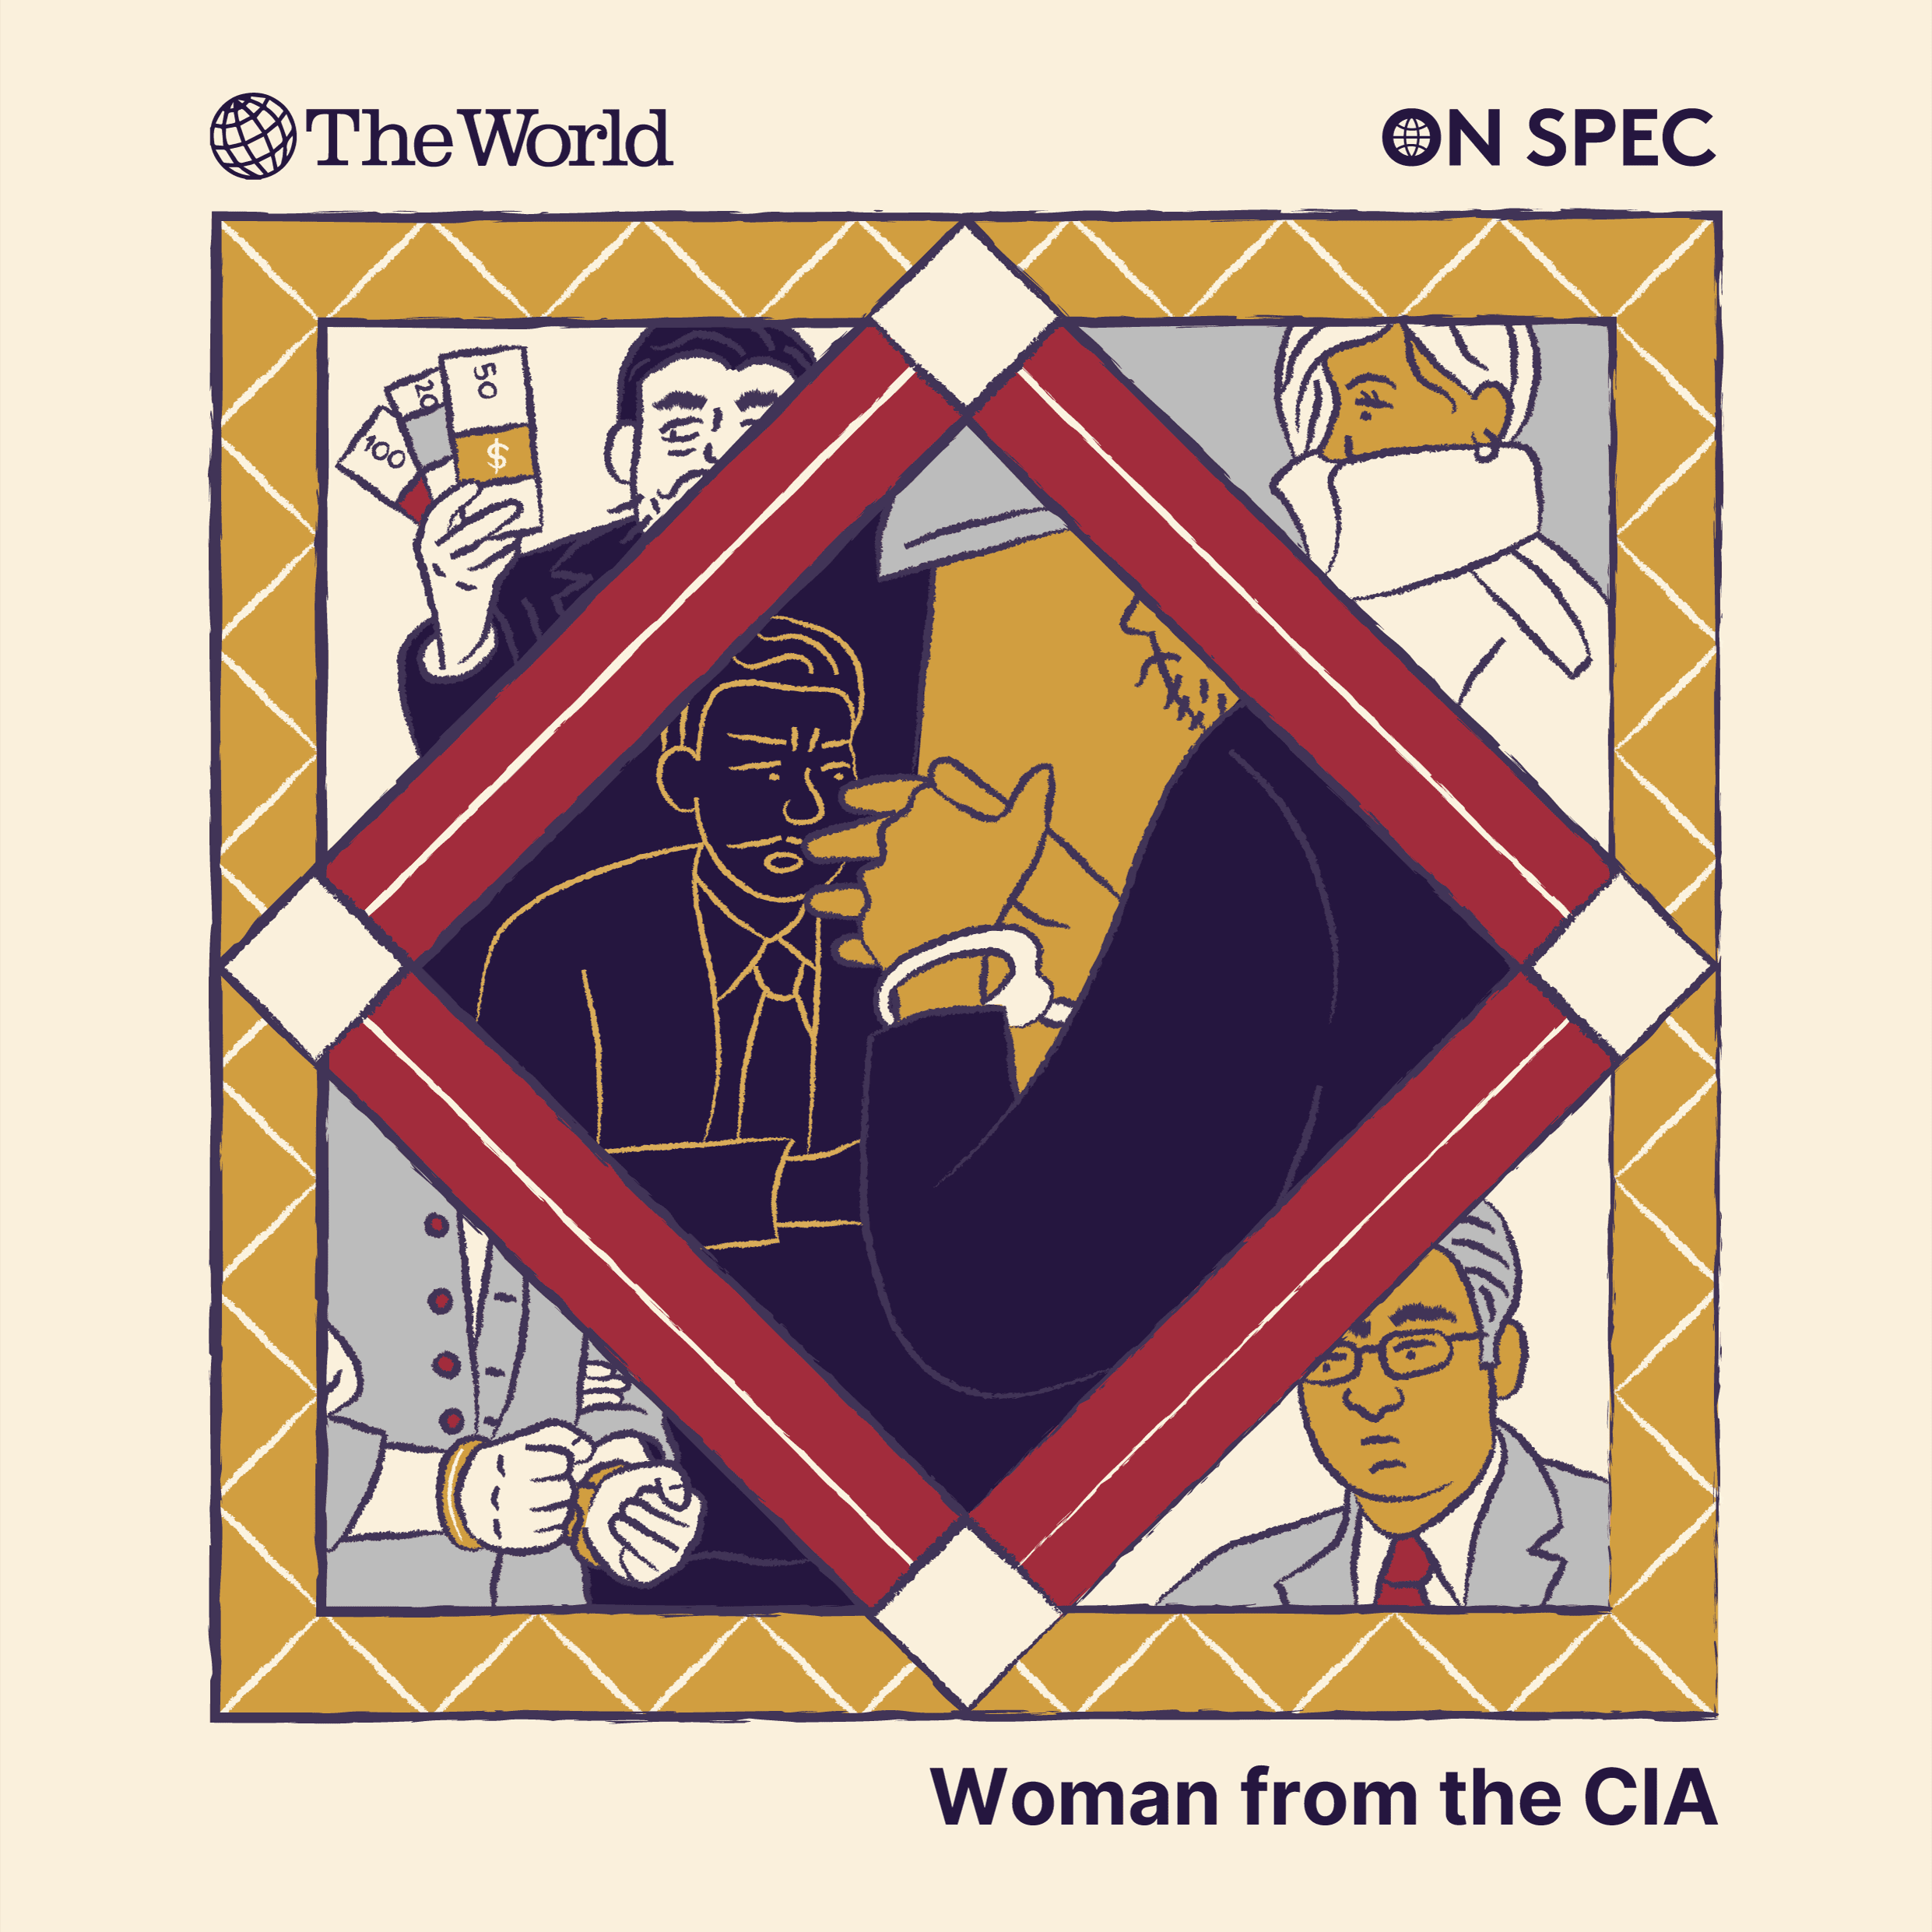 Thumbnail for "Lethal Dissent 6 - Woman from the CIA".